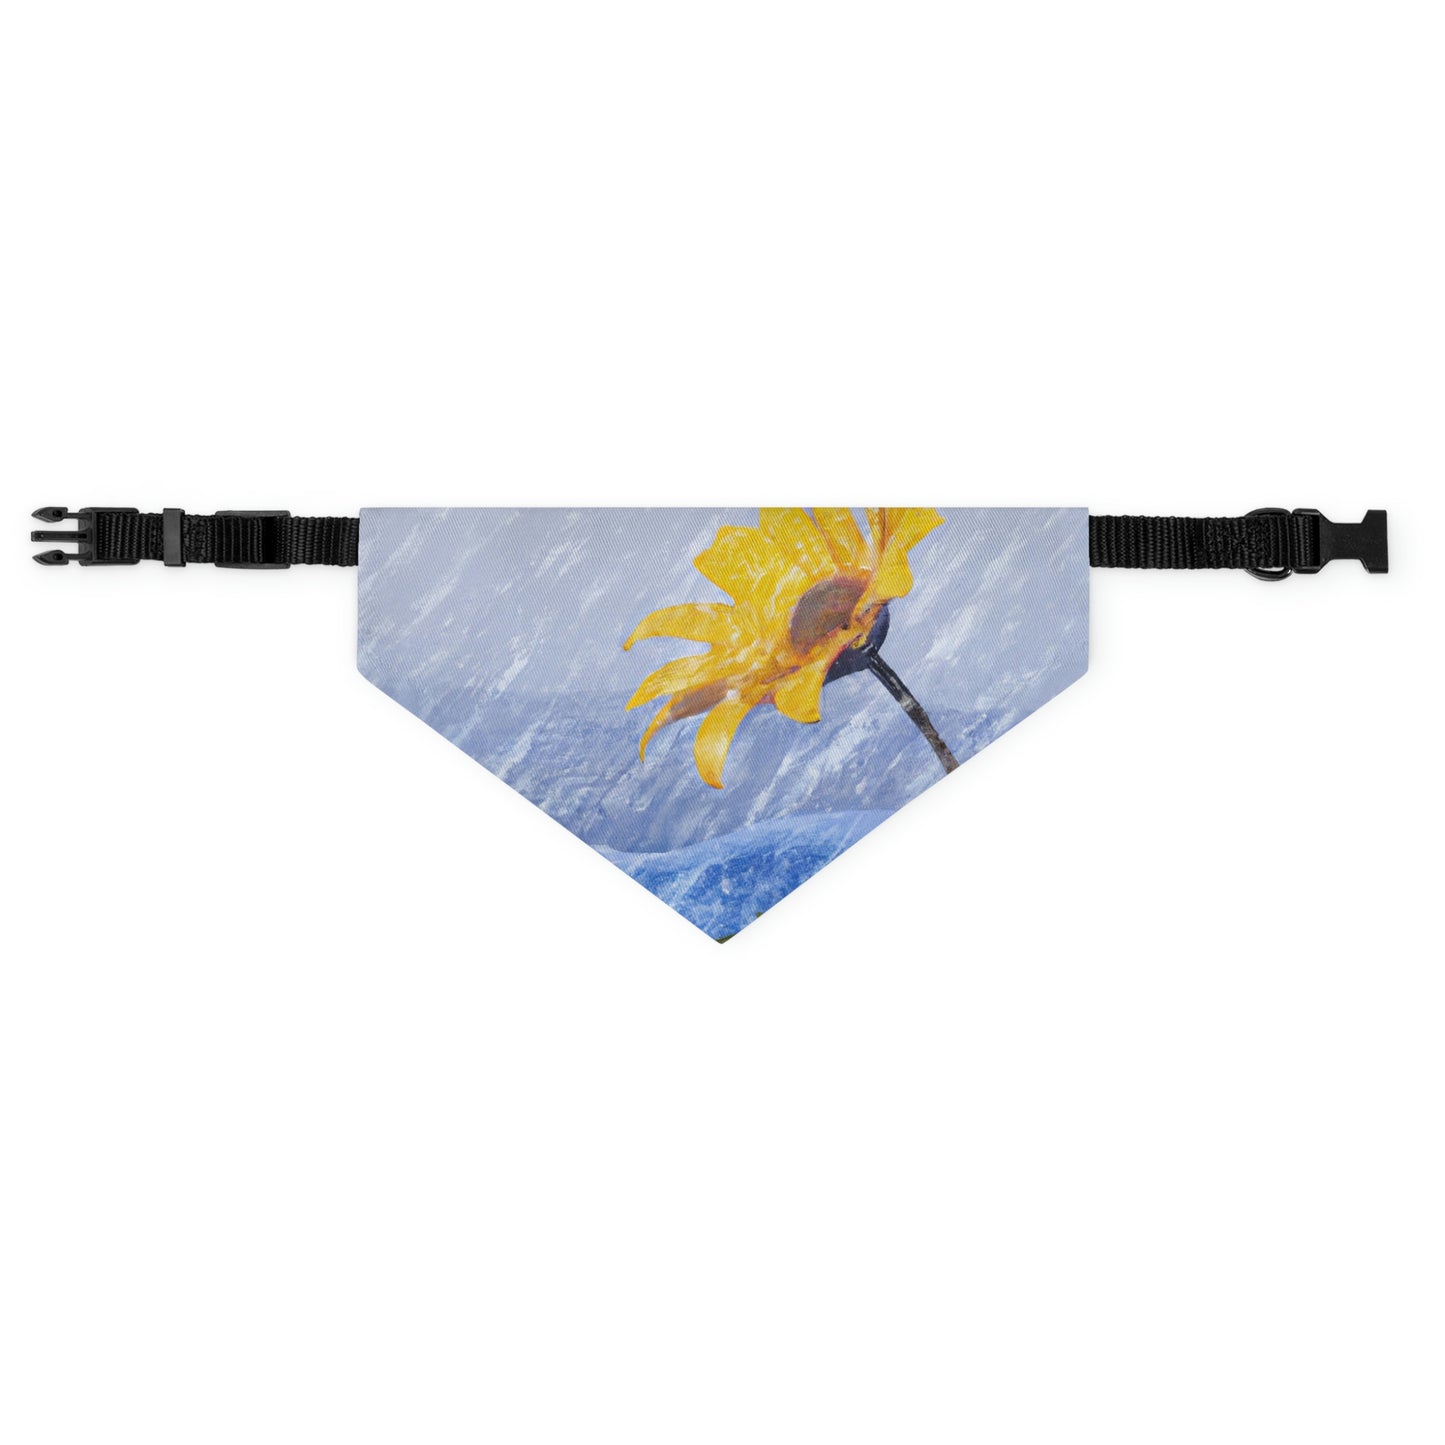 "A Burst of Color in the Glistening White: The Miracle of a Flower Blooms in a Snowstorm" - The Alien Pet Bandana Collar